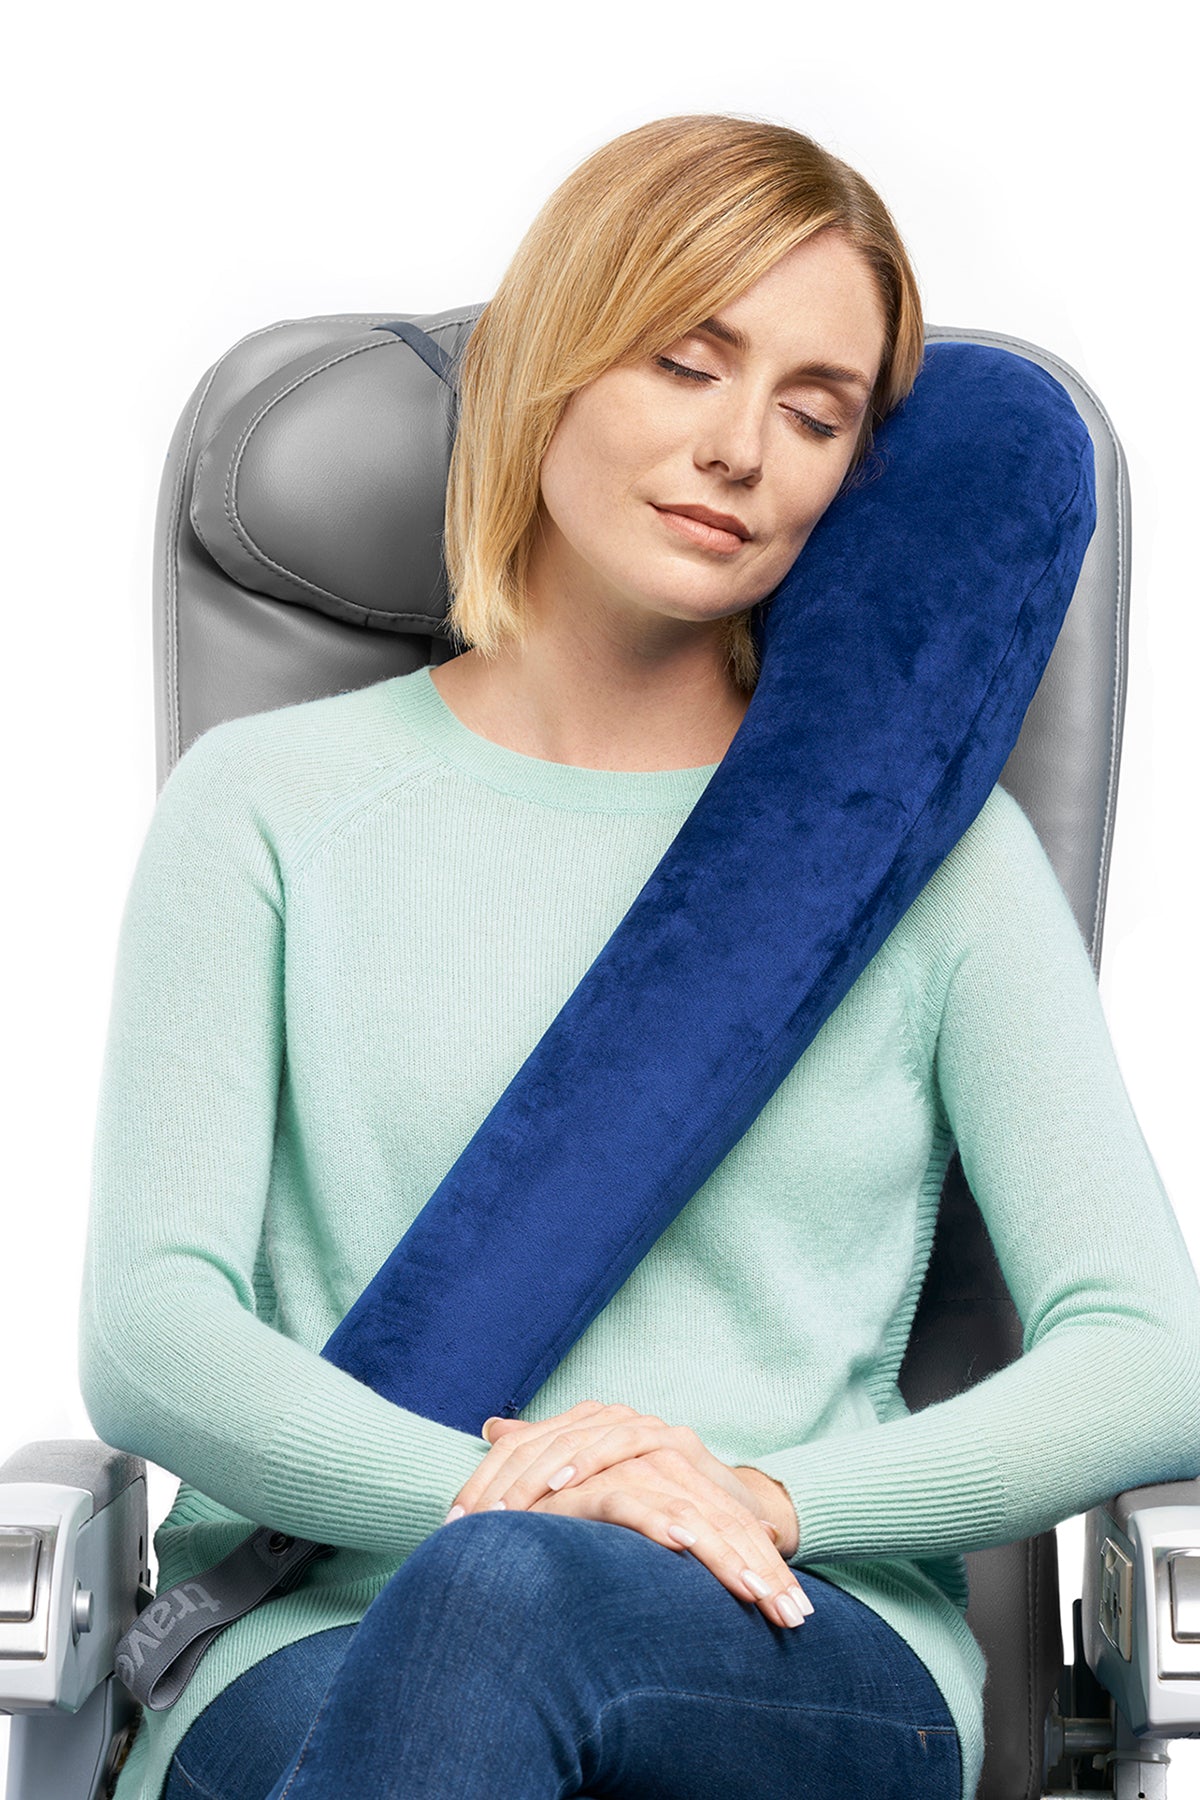 Travelrest All-in-One Premium Travel Pillow / Neck Pillow - Plush Washable Cover